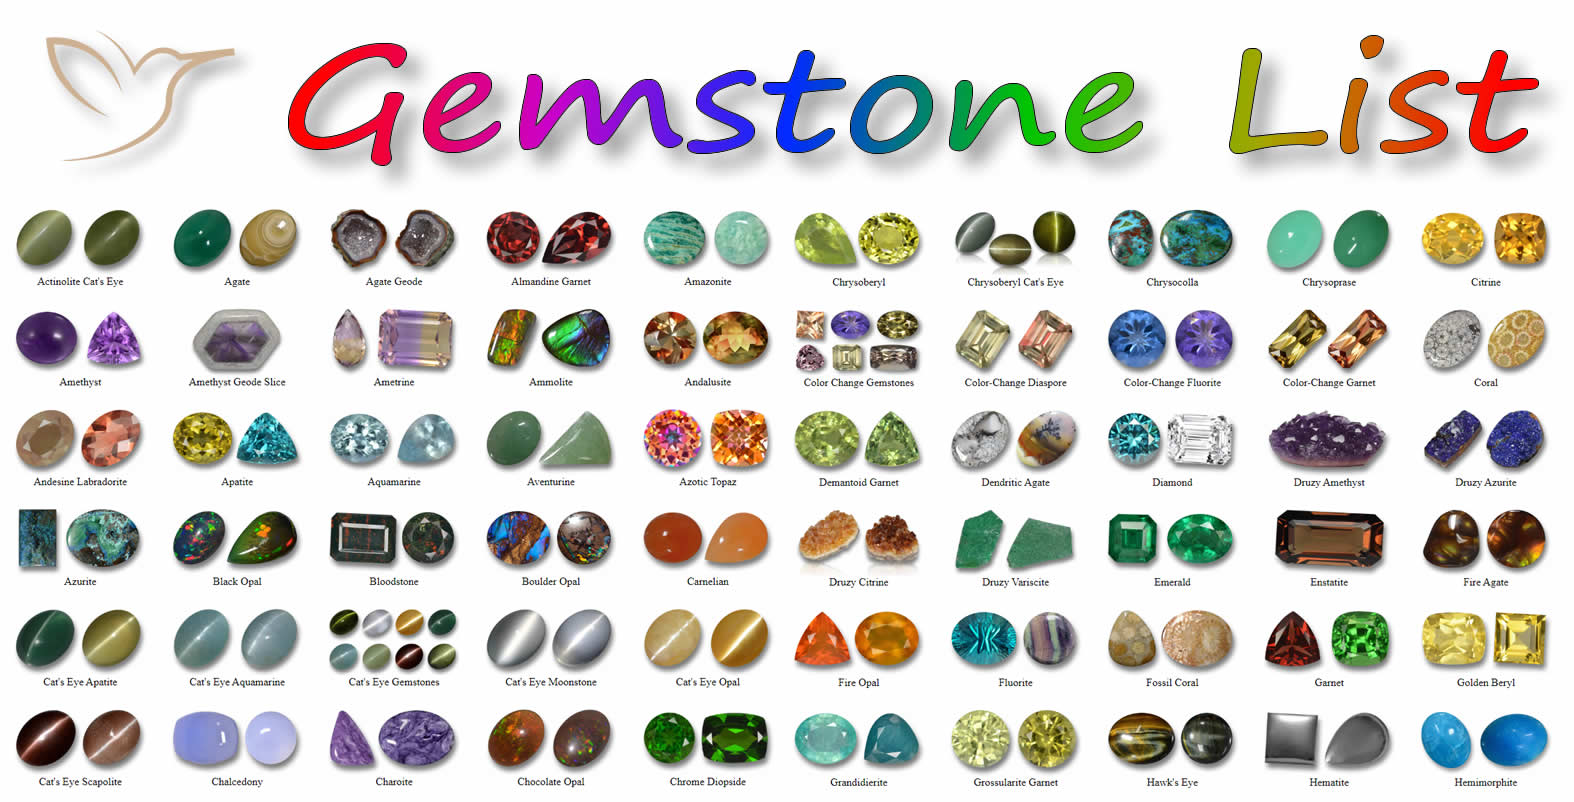 Gemstone List: A Complete Gemstones List with Images